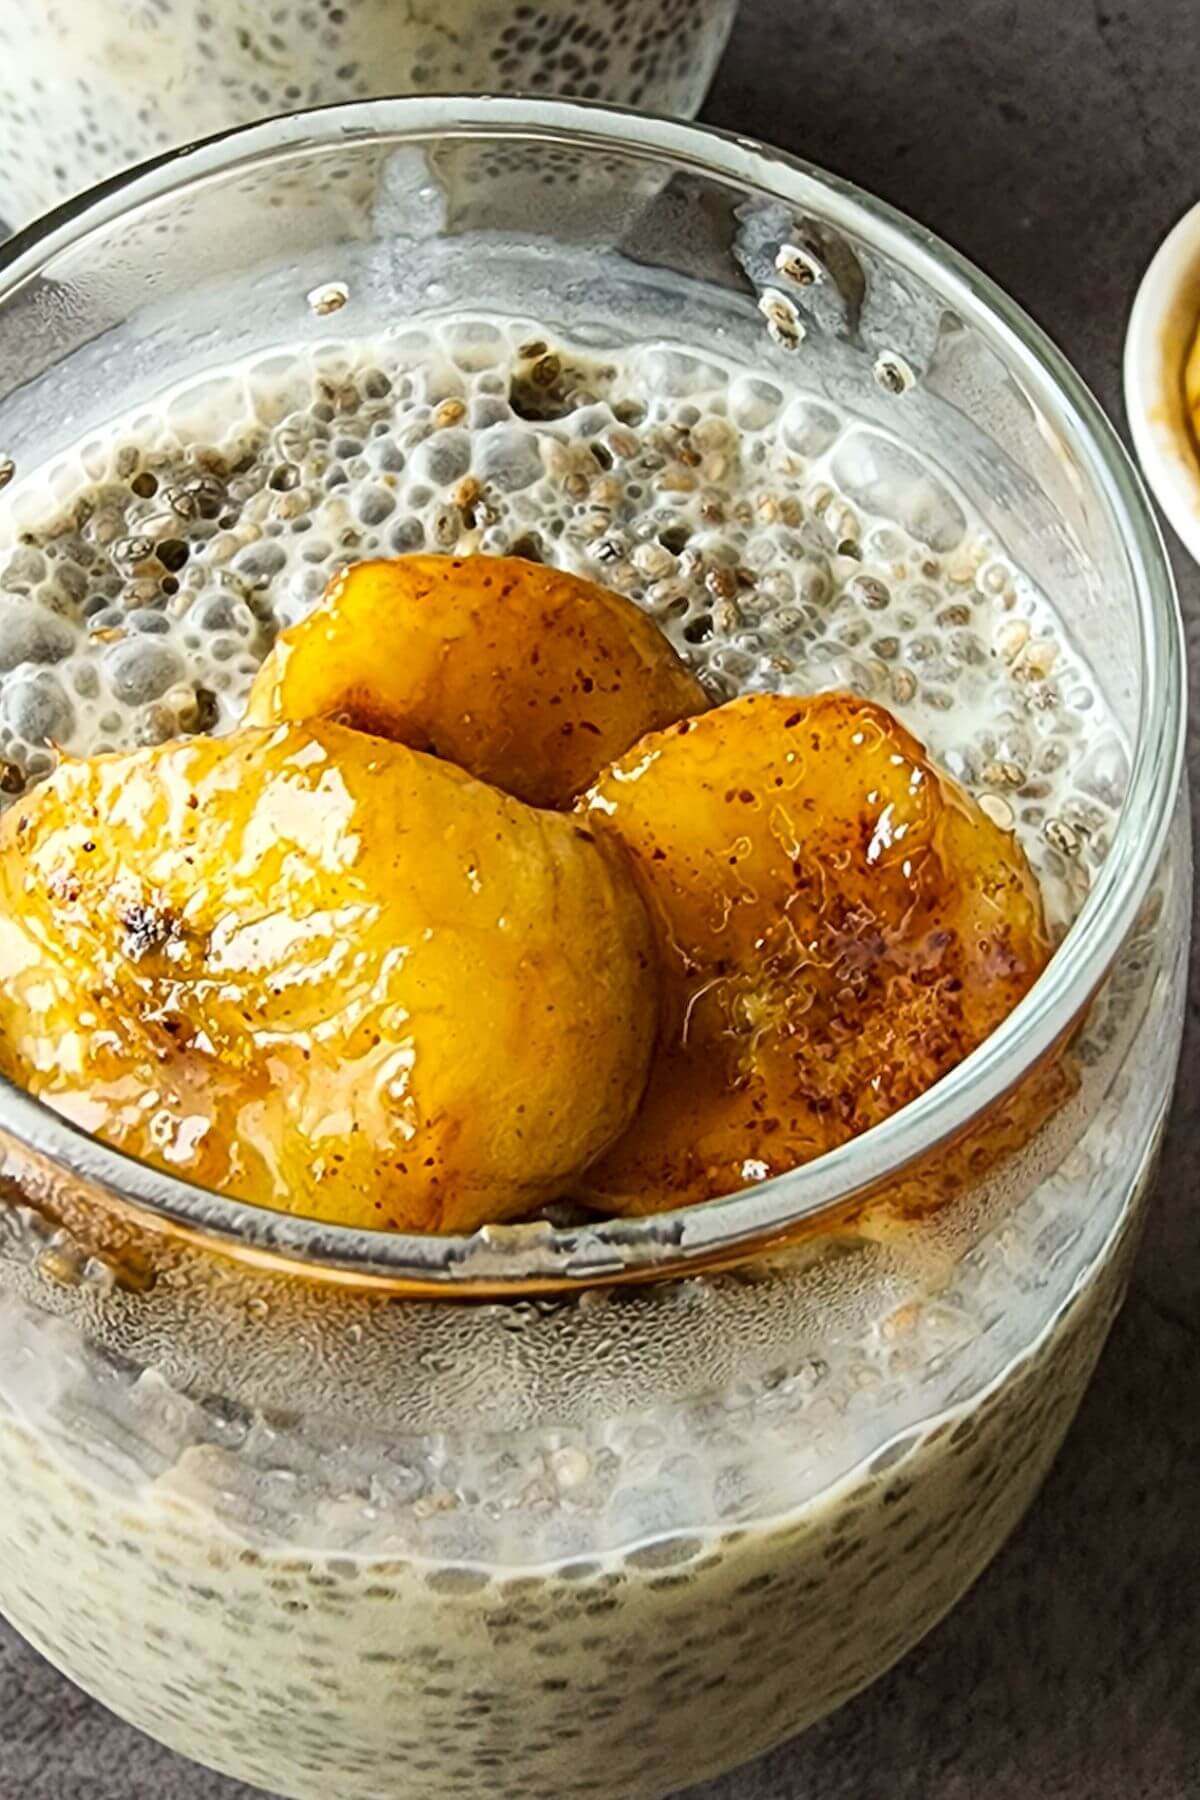 Chia pudding and caramelized banana slices in a glass.